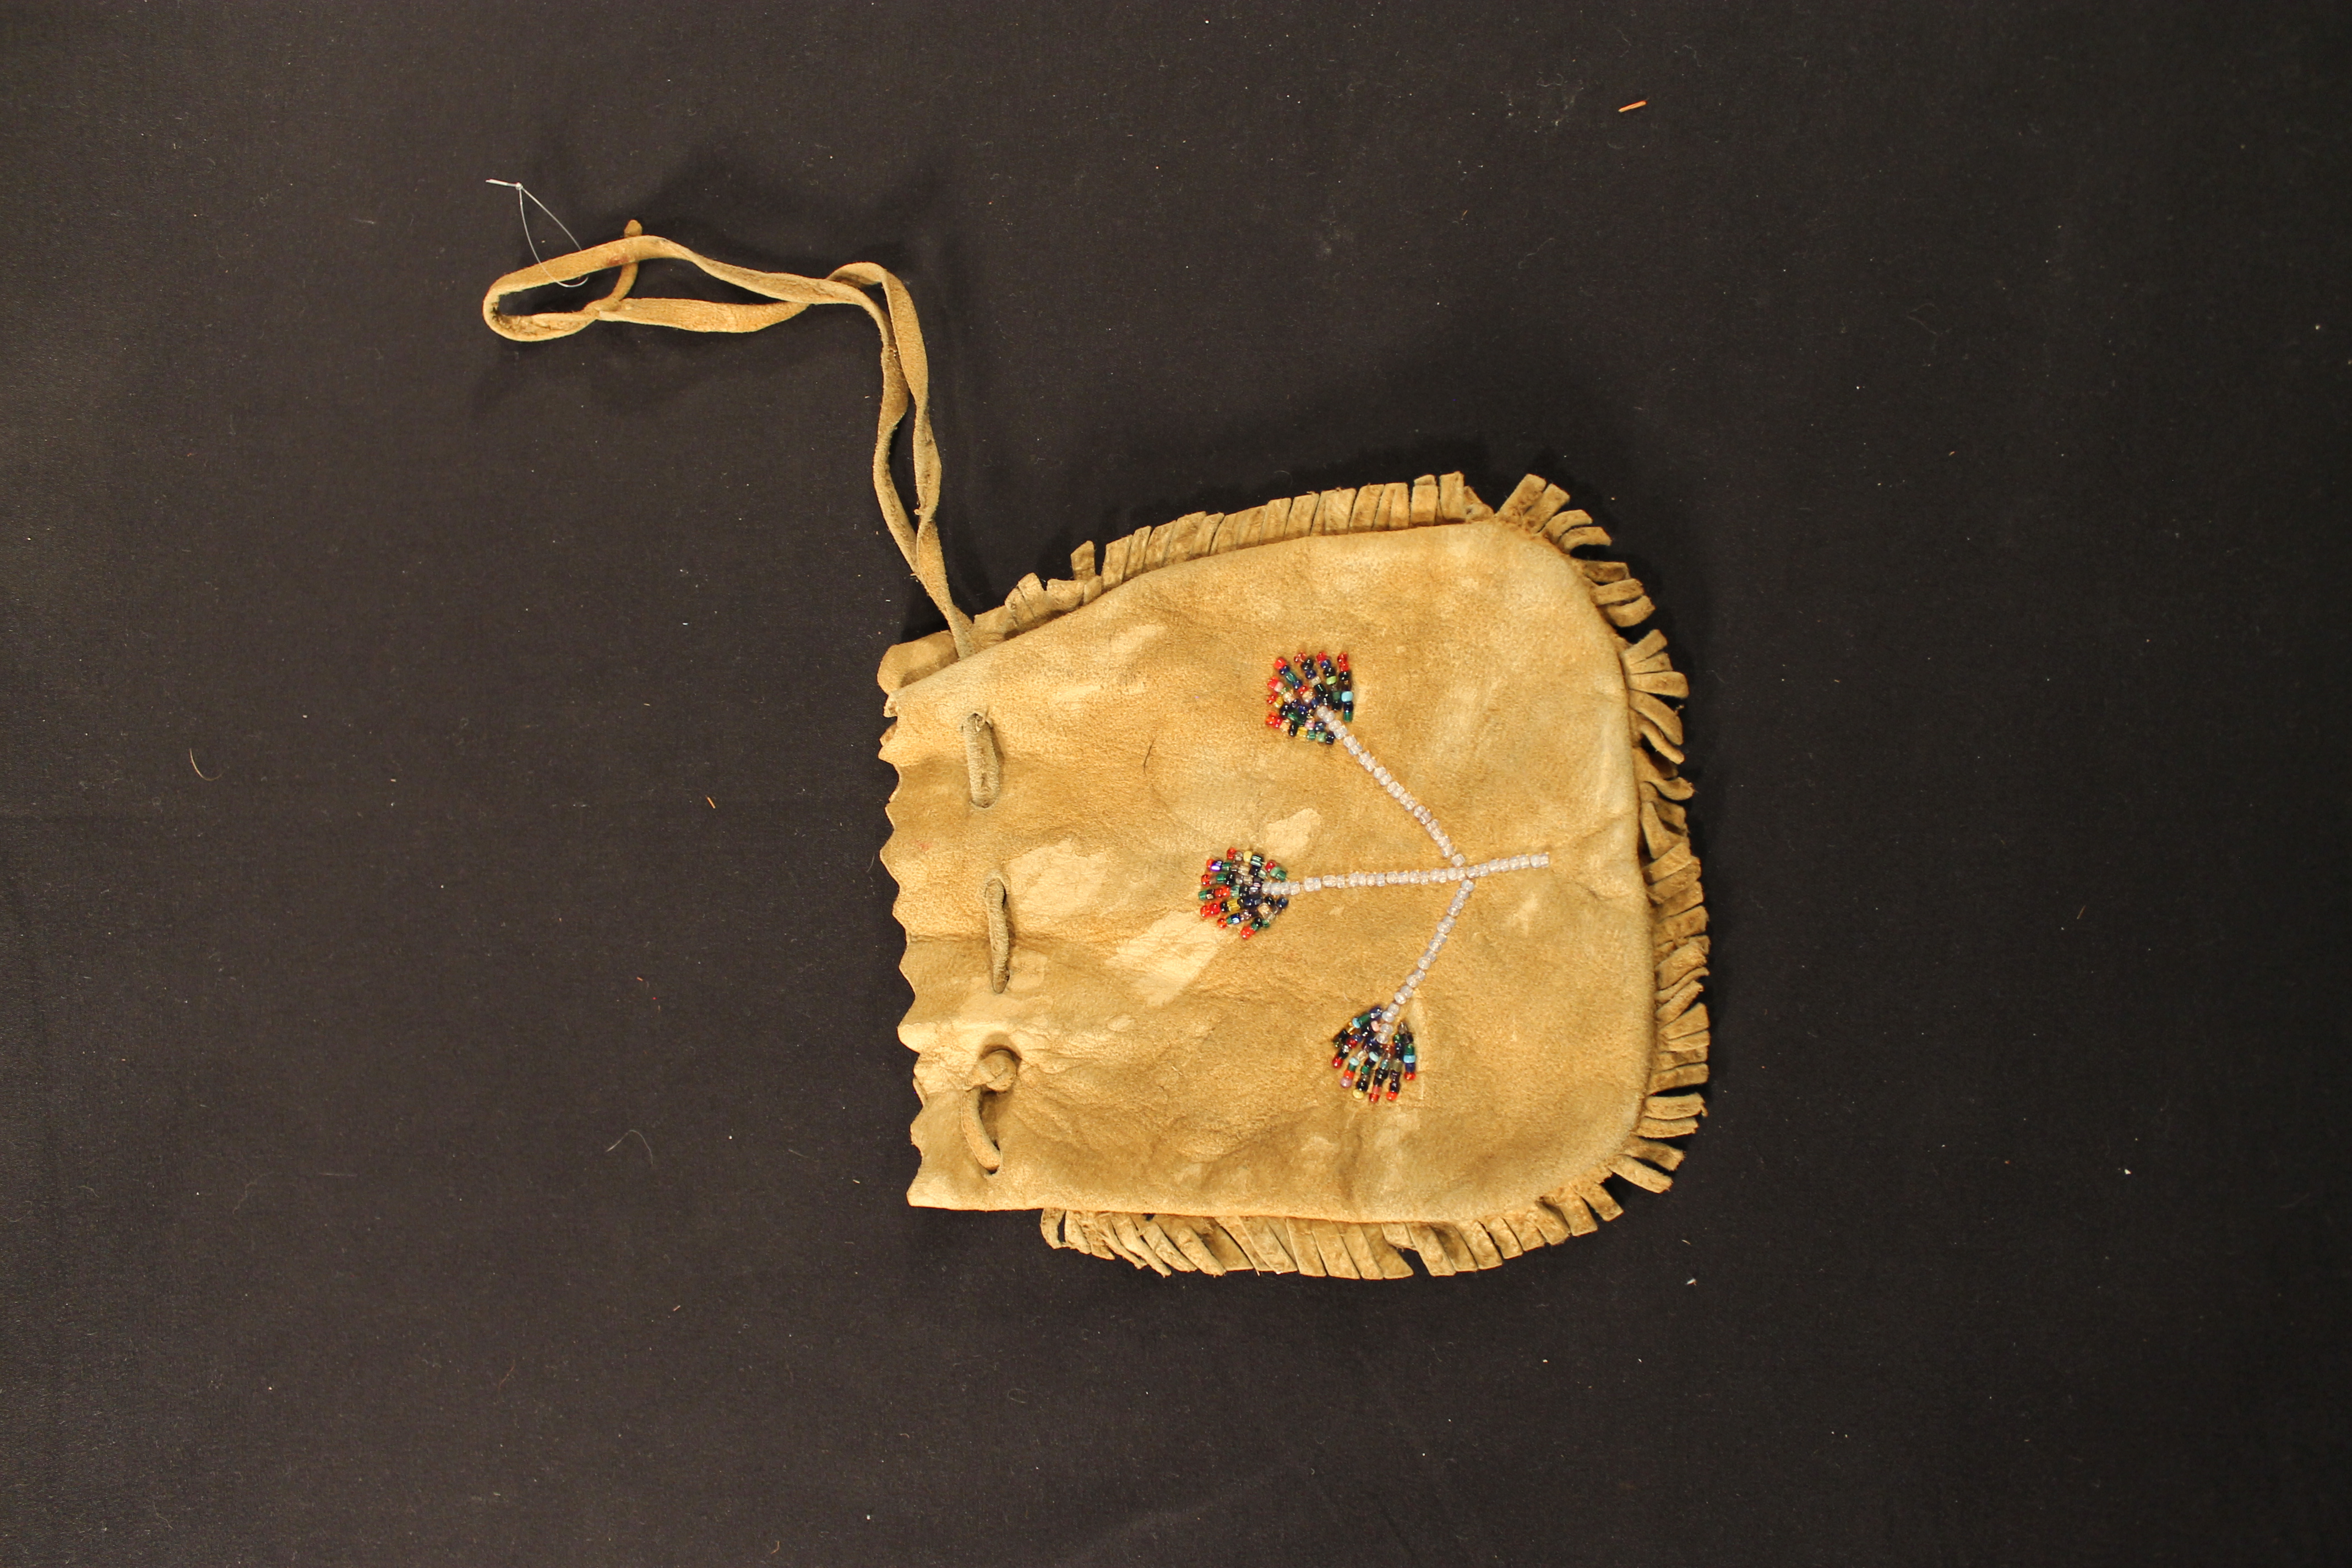 Bag made out of tan leather with multi-flower seed beads on each side. The bag has a drawstring and there is fringe that goes around the bag.